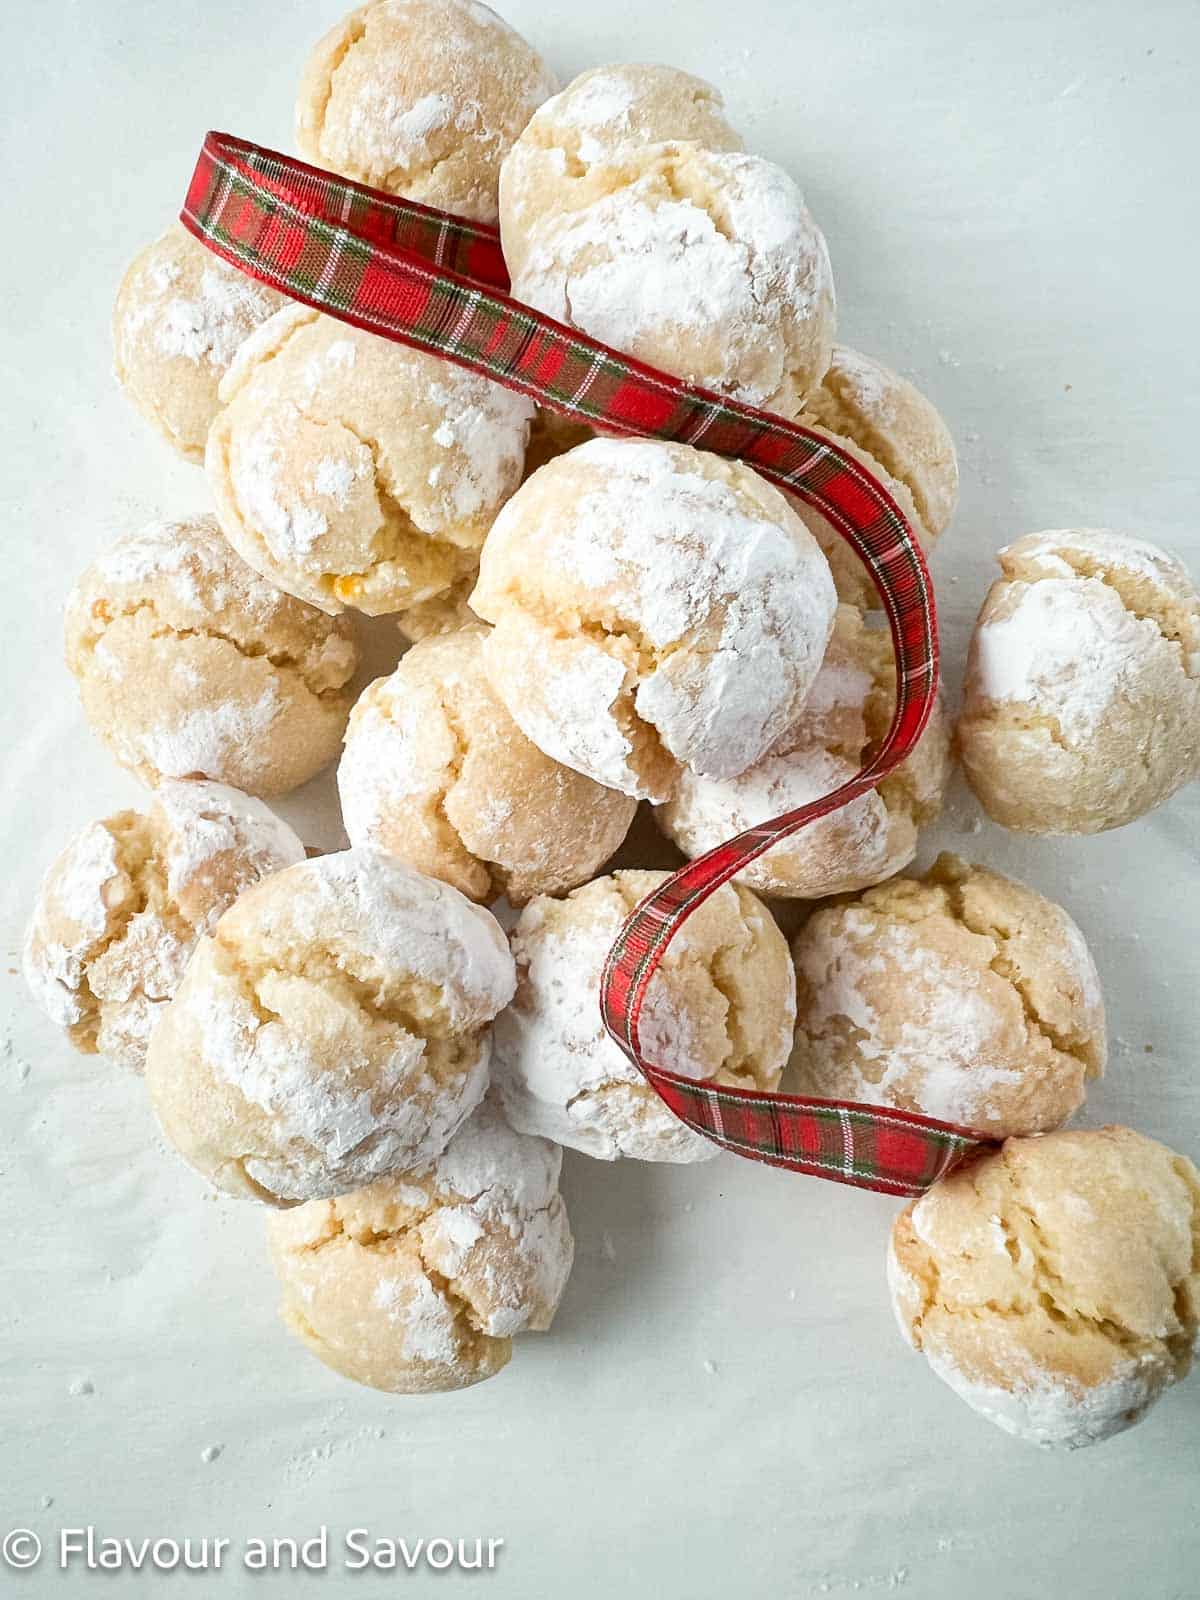 Italian almond cookies dusted with confectioner's sugar.